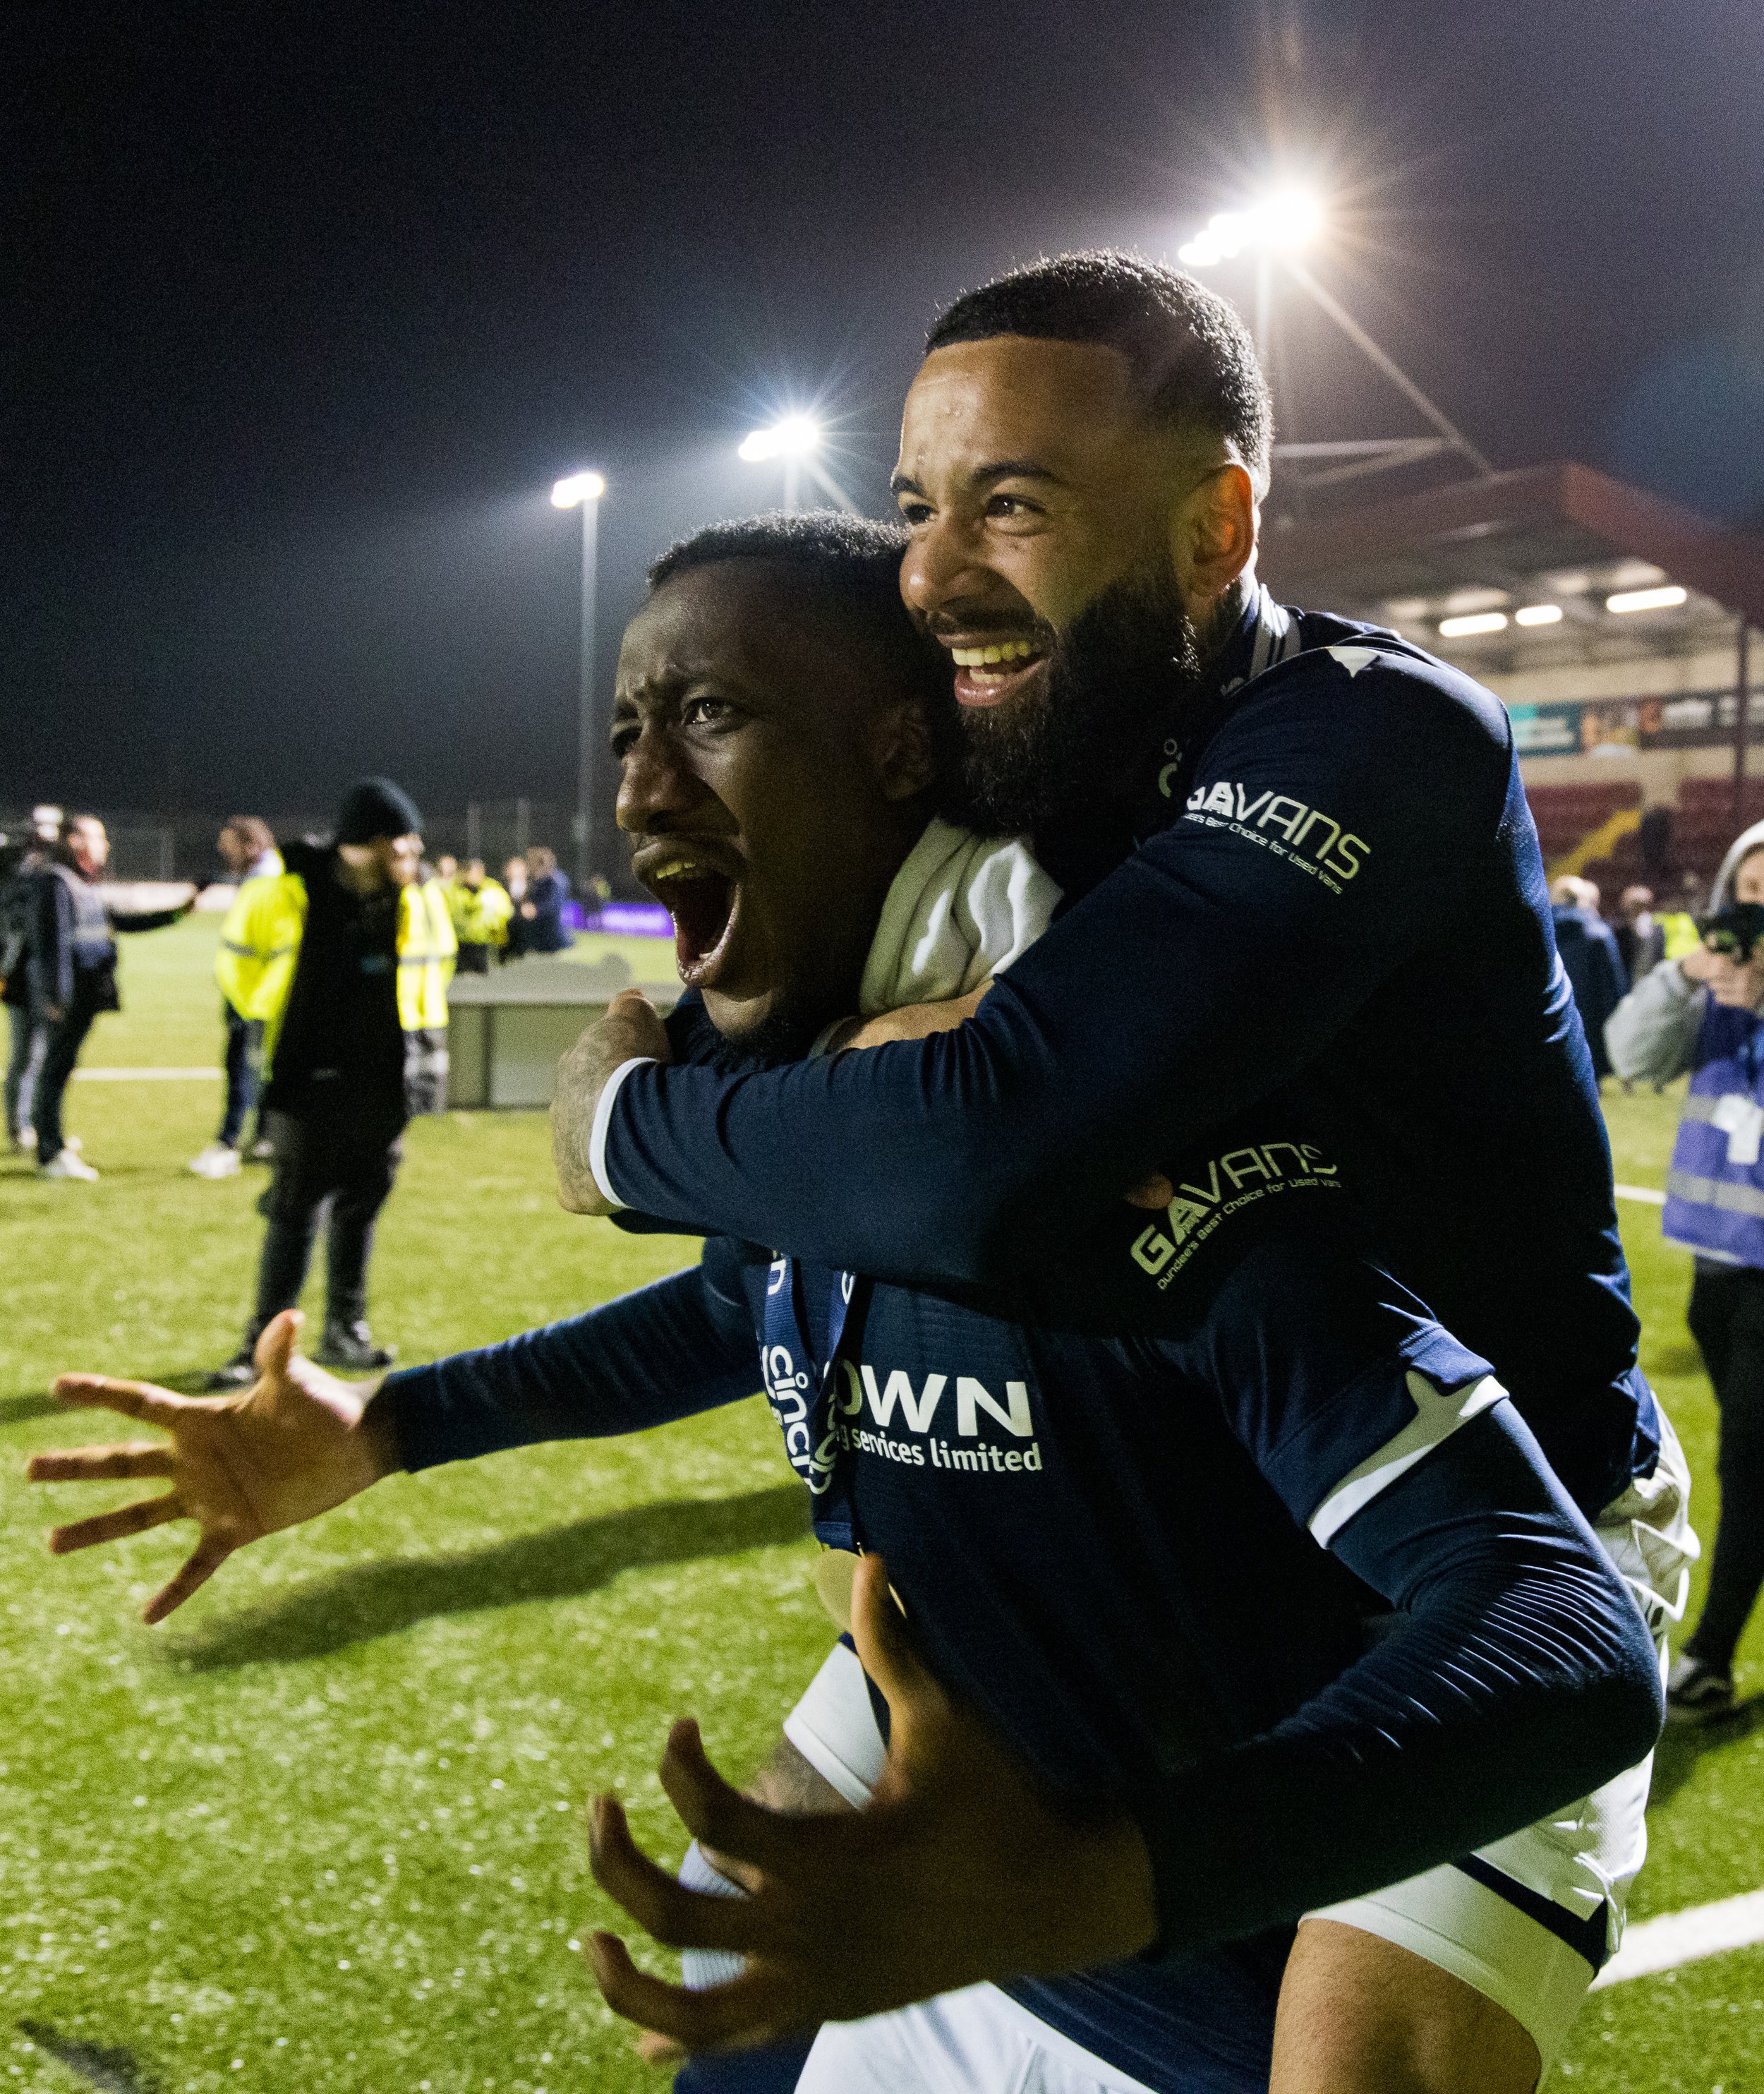  Dundee players celebrate winning the championship after victory over Queen’s Park 